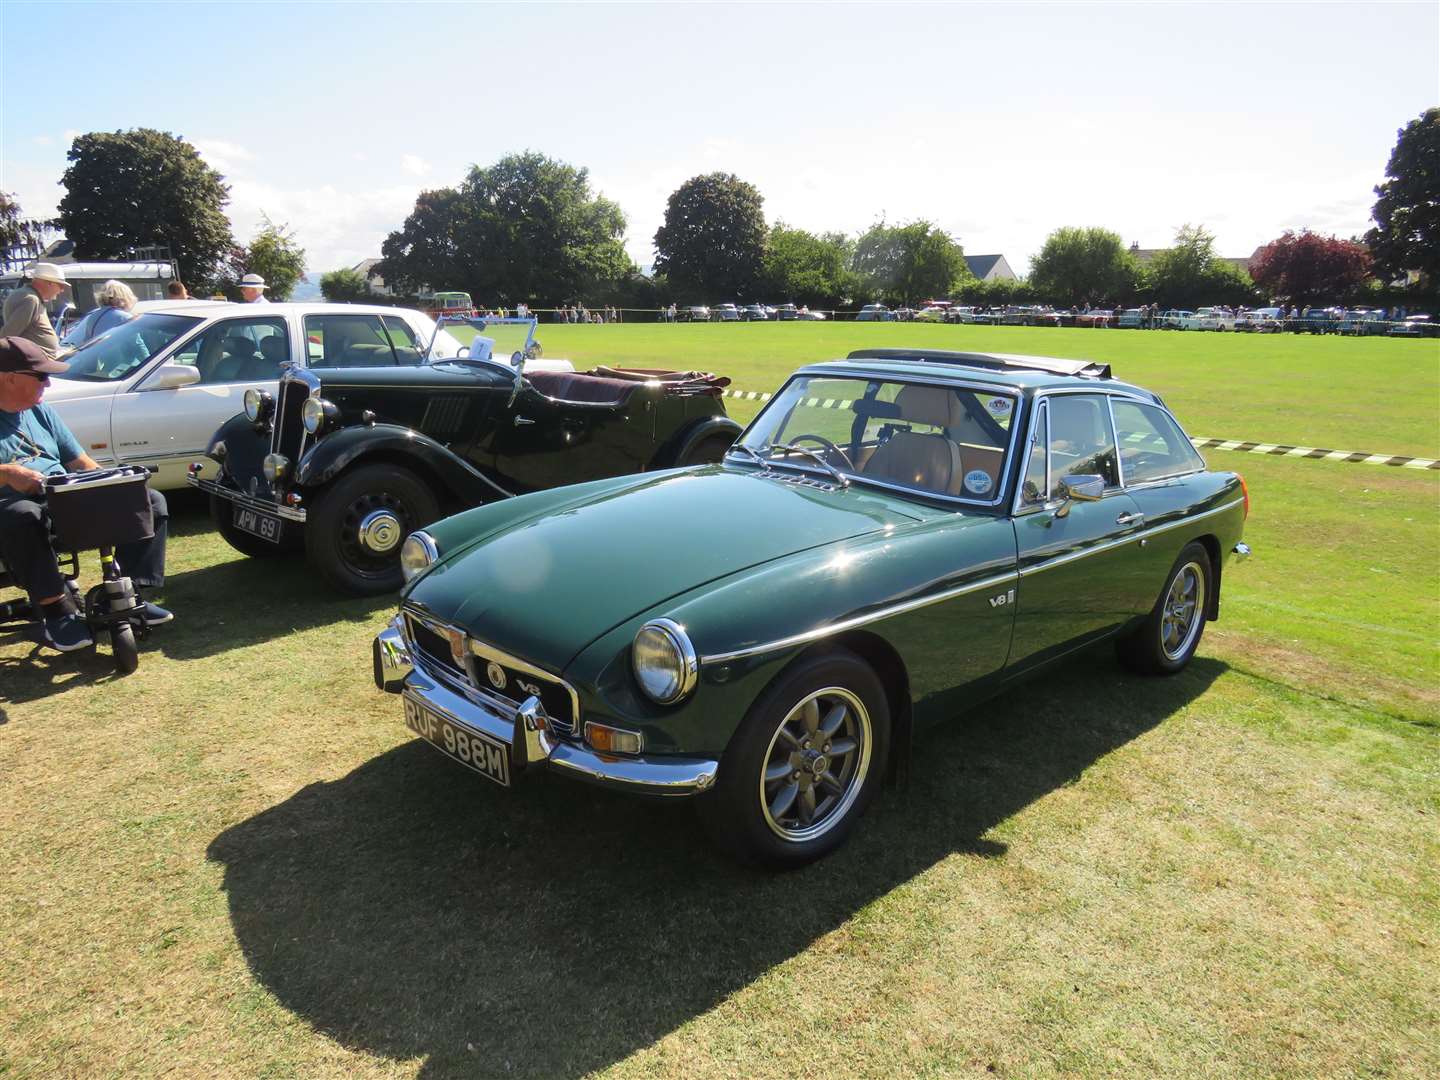 Chris Silver's MGB V8 with the Morris 8 of Robert McIntosh behind.